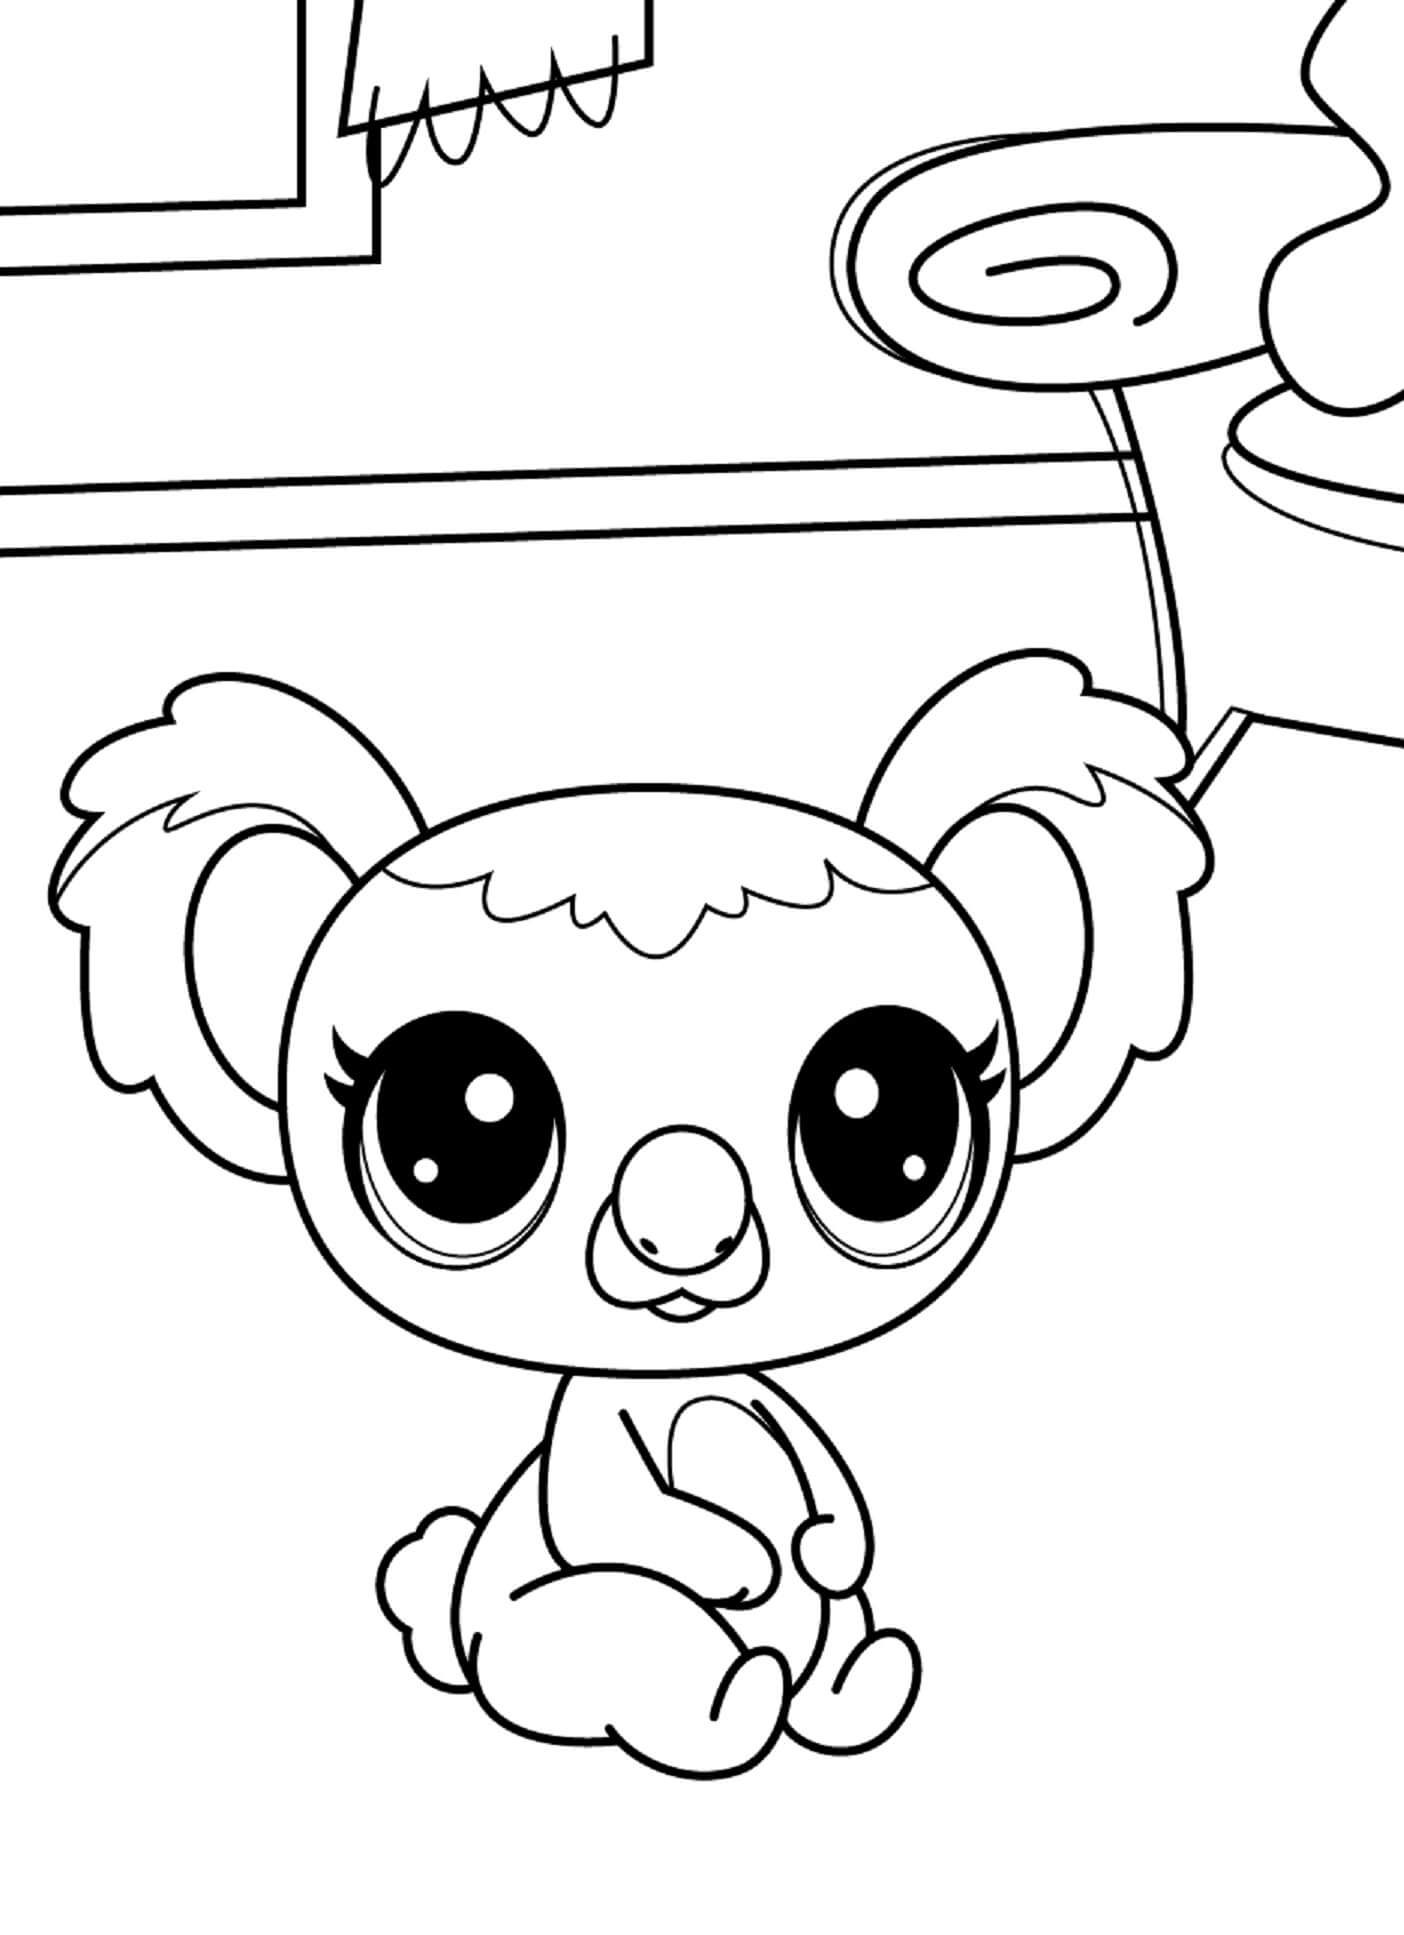 Cartoon Pets Koala coloring page - Download, Print or Color Online for Free